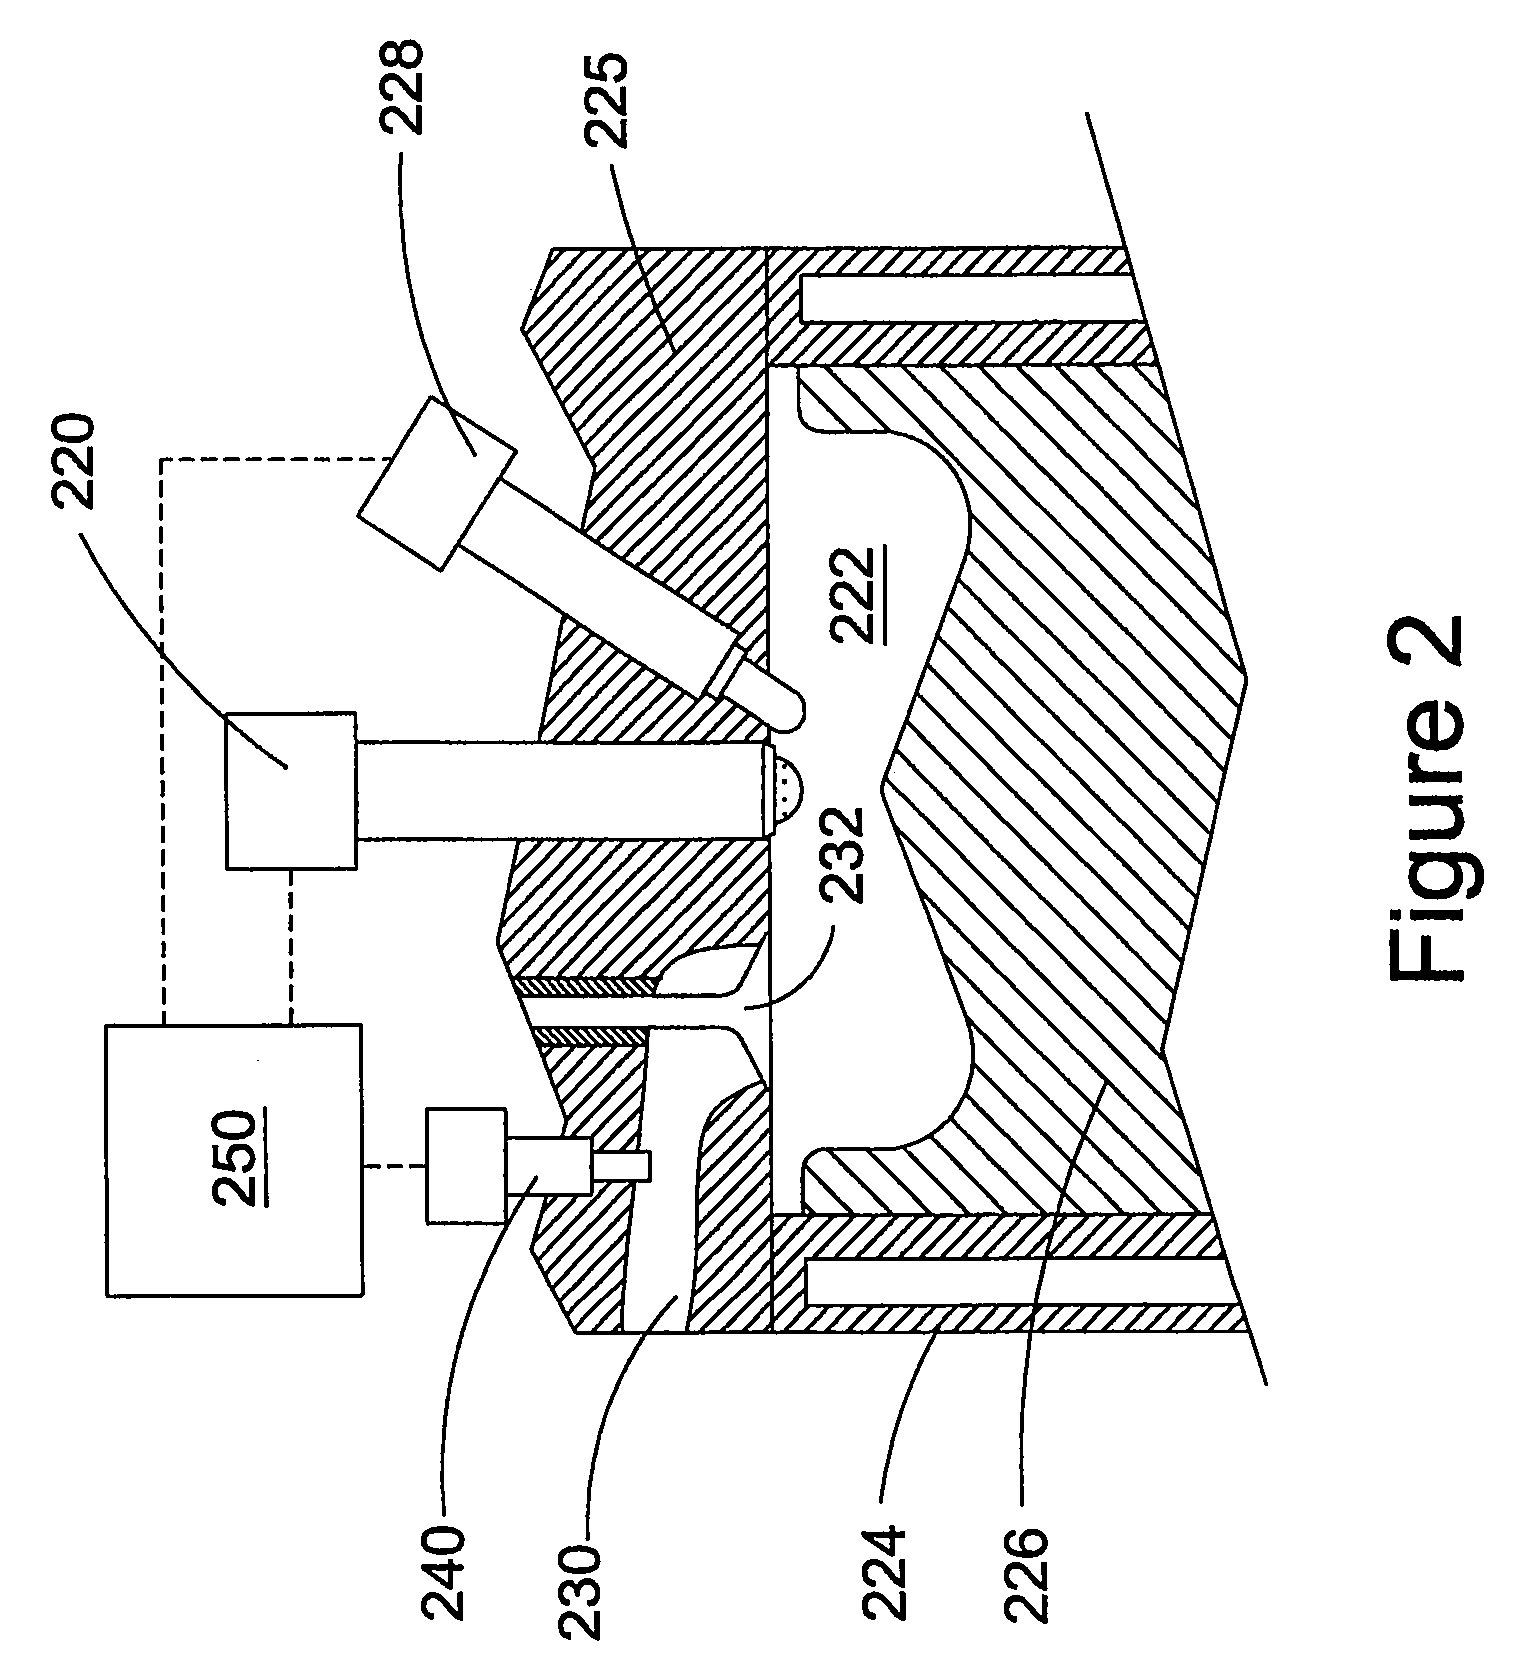 Method And Apparatus Of Fuelling An Internal Combustion Engine With Hydrogen And Methane